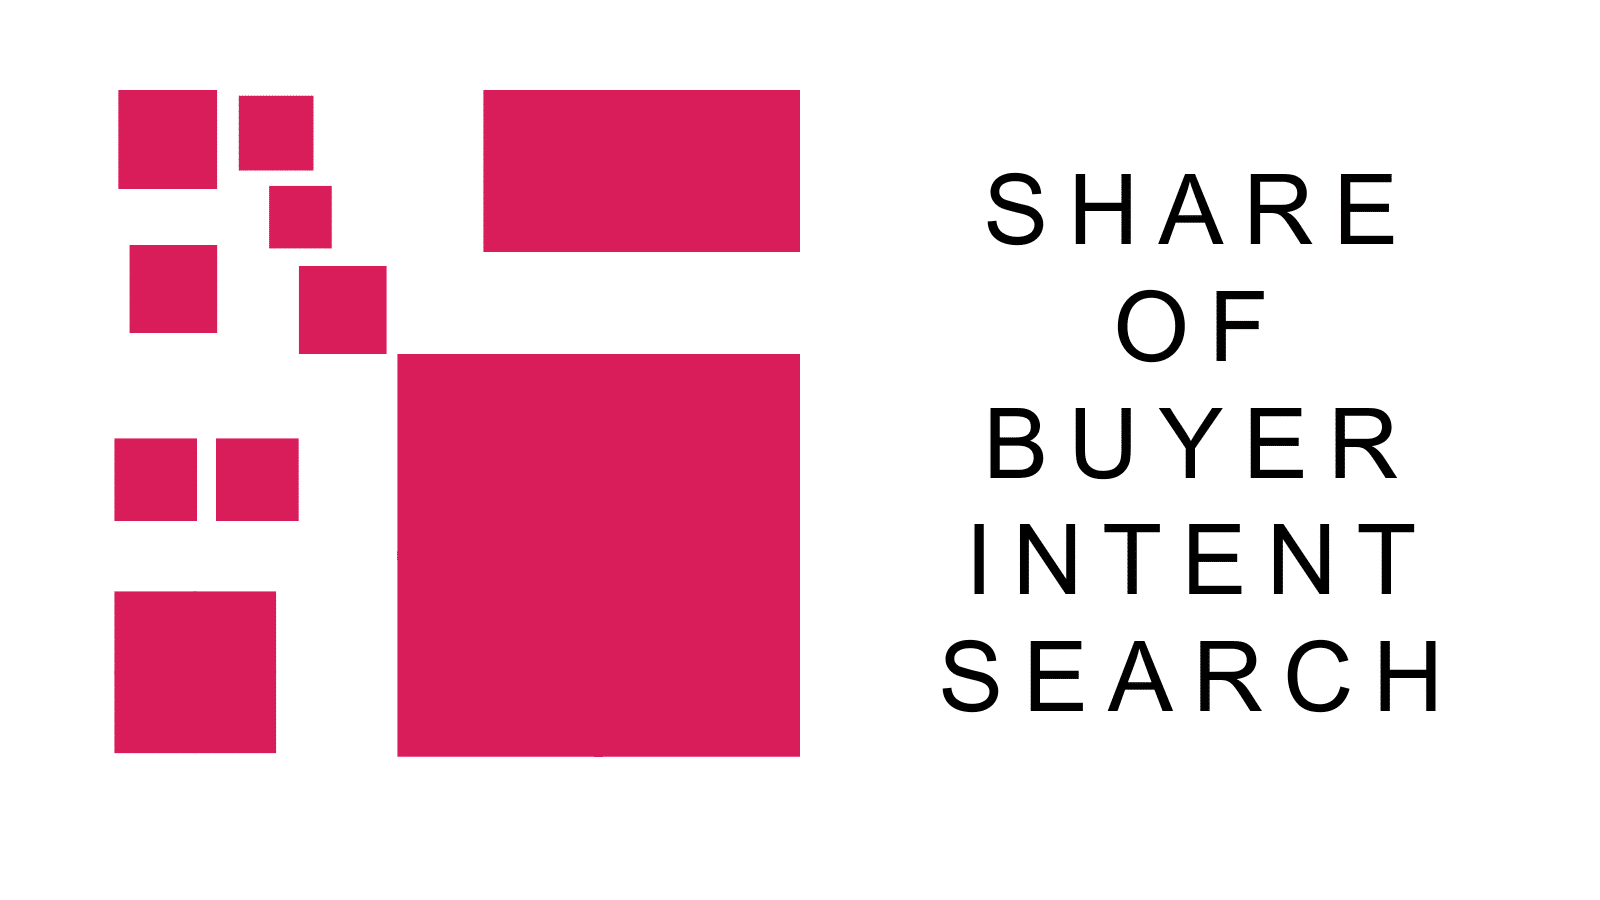 Share of buyer intent search